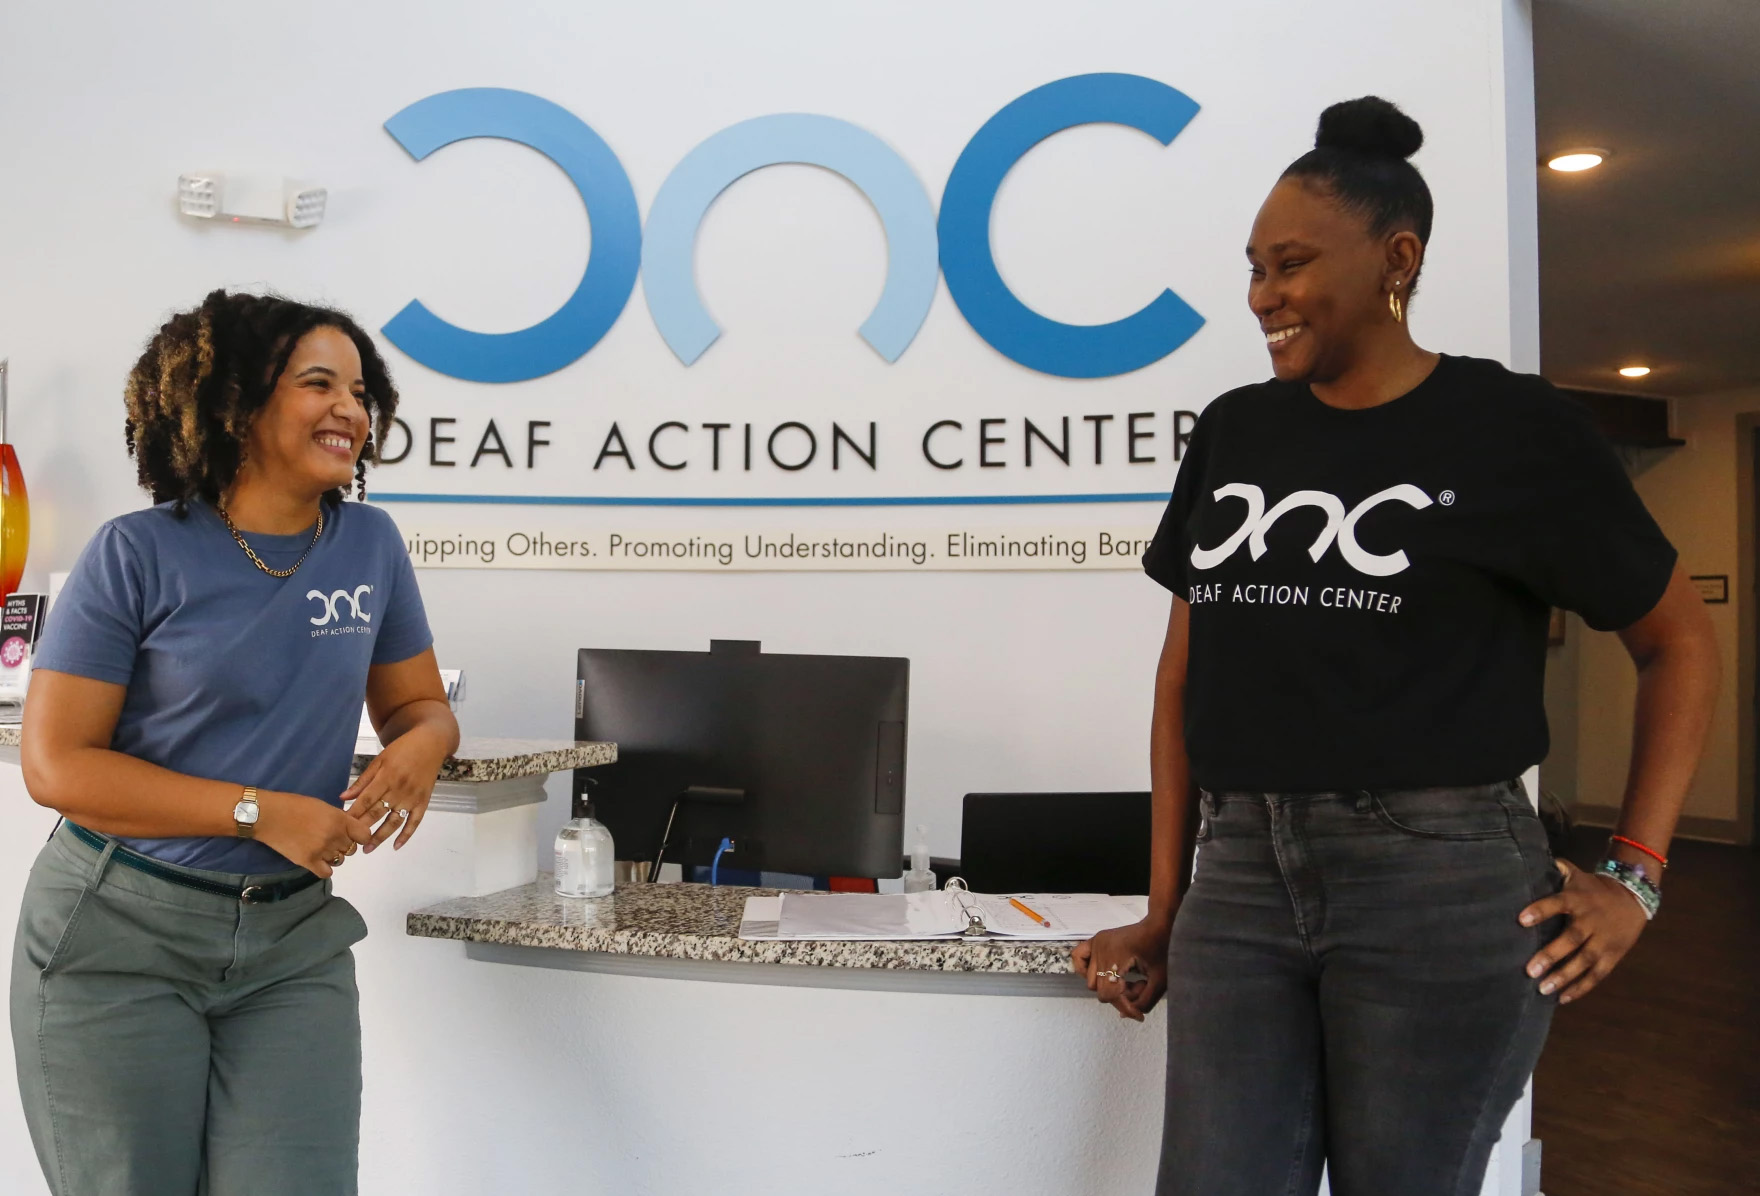 Two women stand on either side of the photo, facing each other and smiling. They're standing in front of what looks to be the reception desk of the Deaf Action Center, the logo of which is seen on the wall behind them as well as on their t-shirts. On the left is Laura Tovar, development director of the center, and on the right is Bianca Walker, a deaf and hard of hearing specialist at the center.